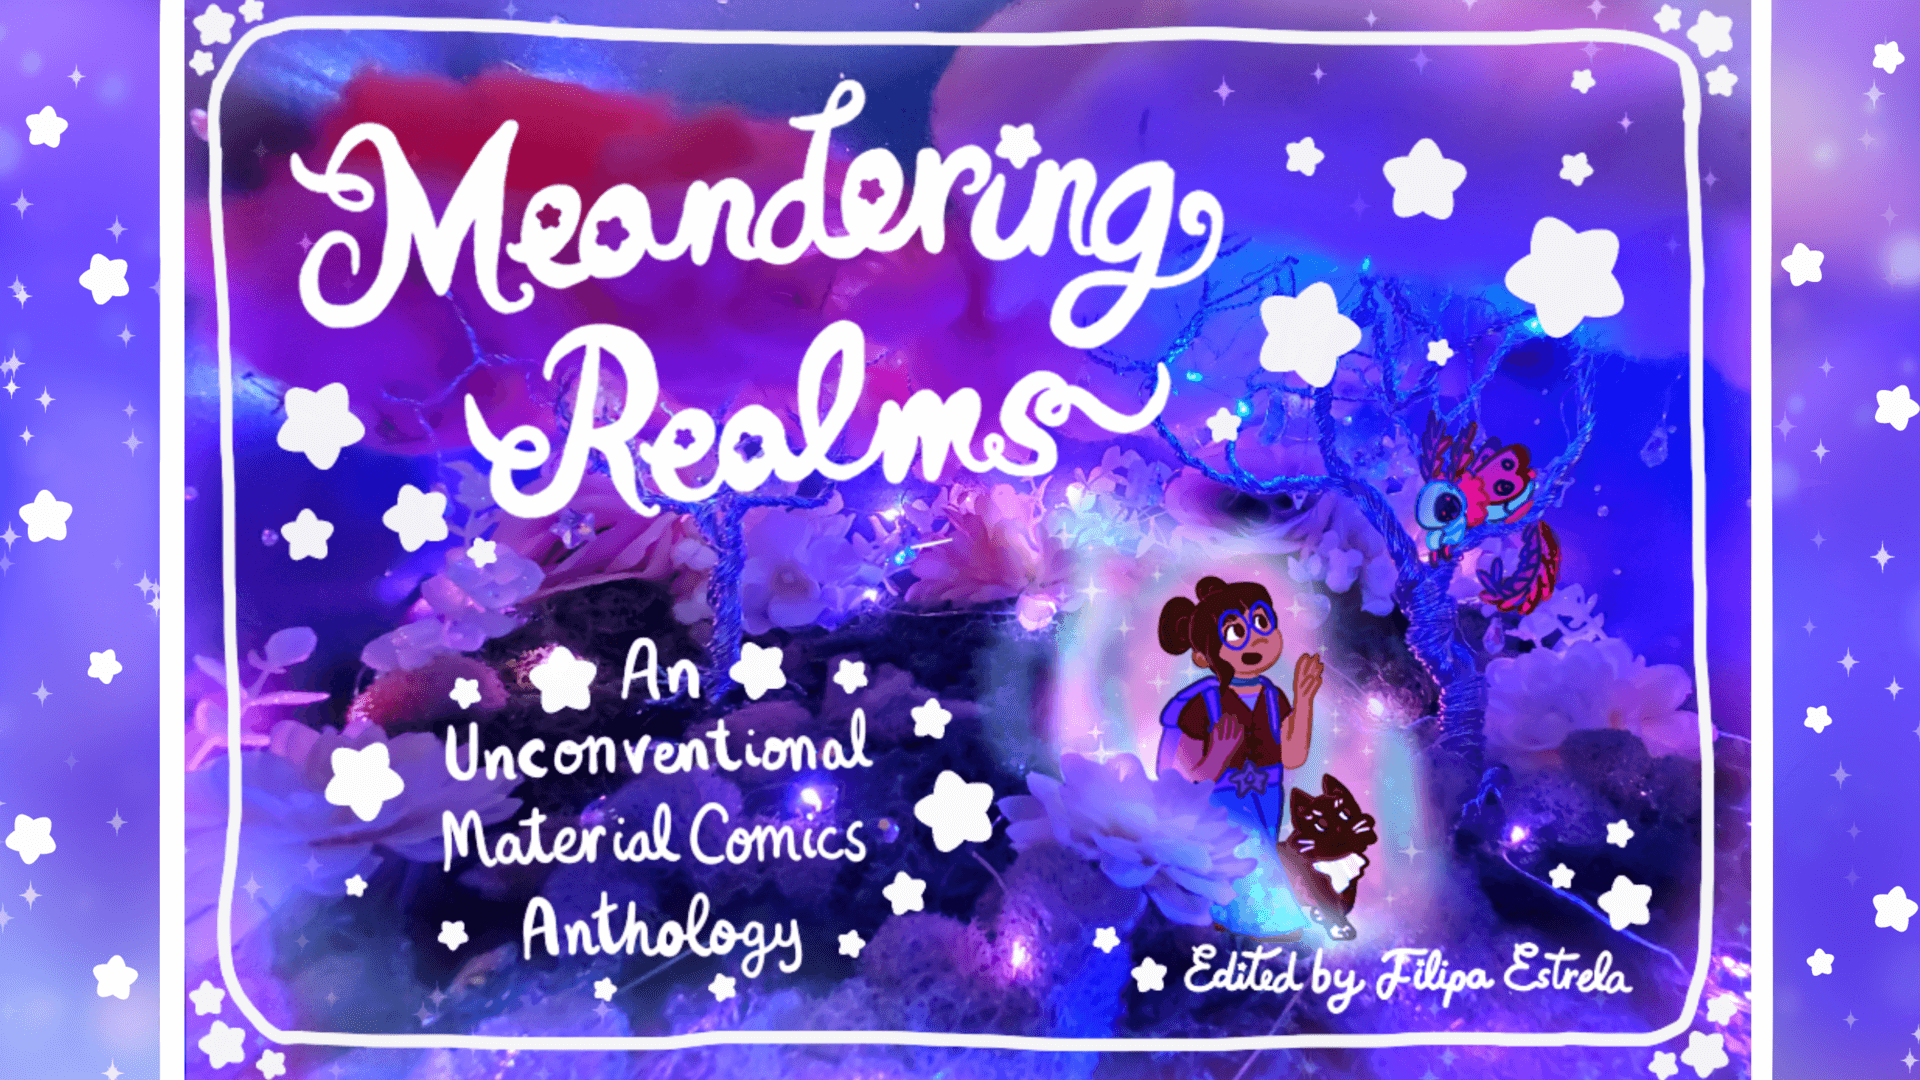 the crowdfinding cover to Meandering Realms